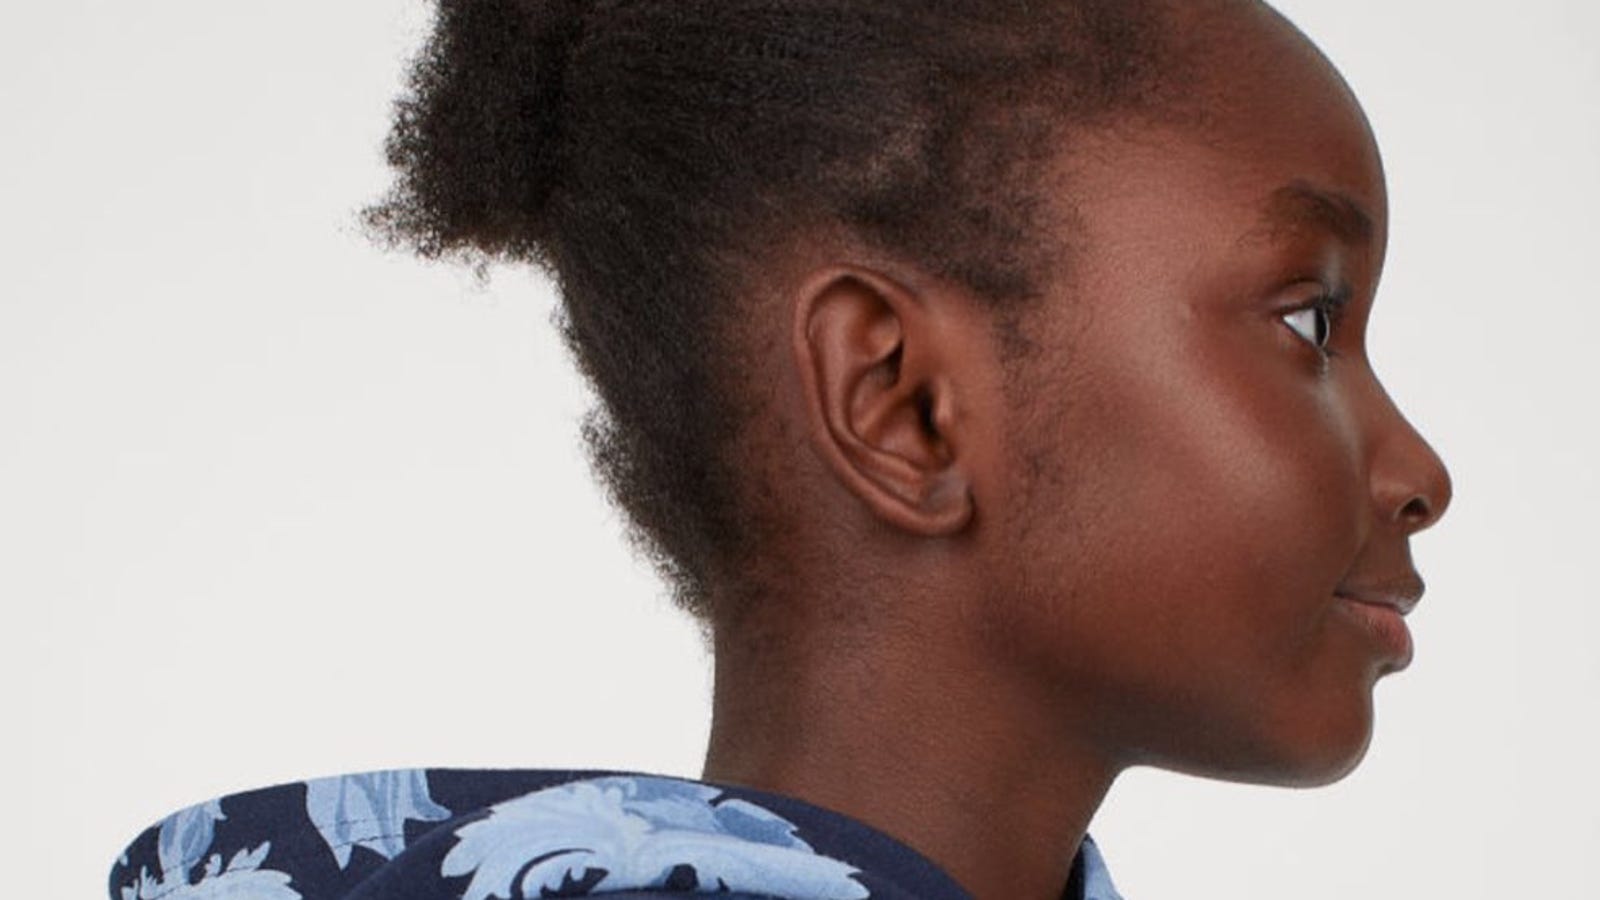 Handm Issues Statement About Black Girl S ‘natural Hair No Apologies